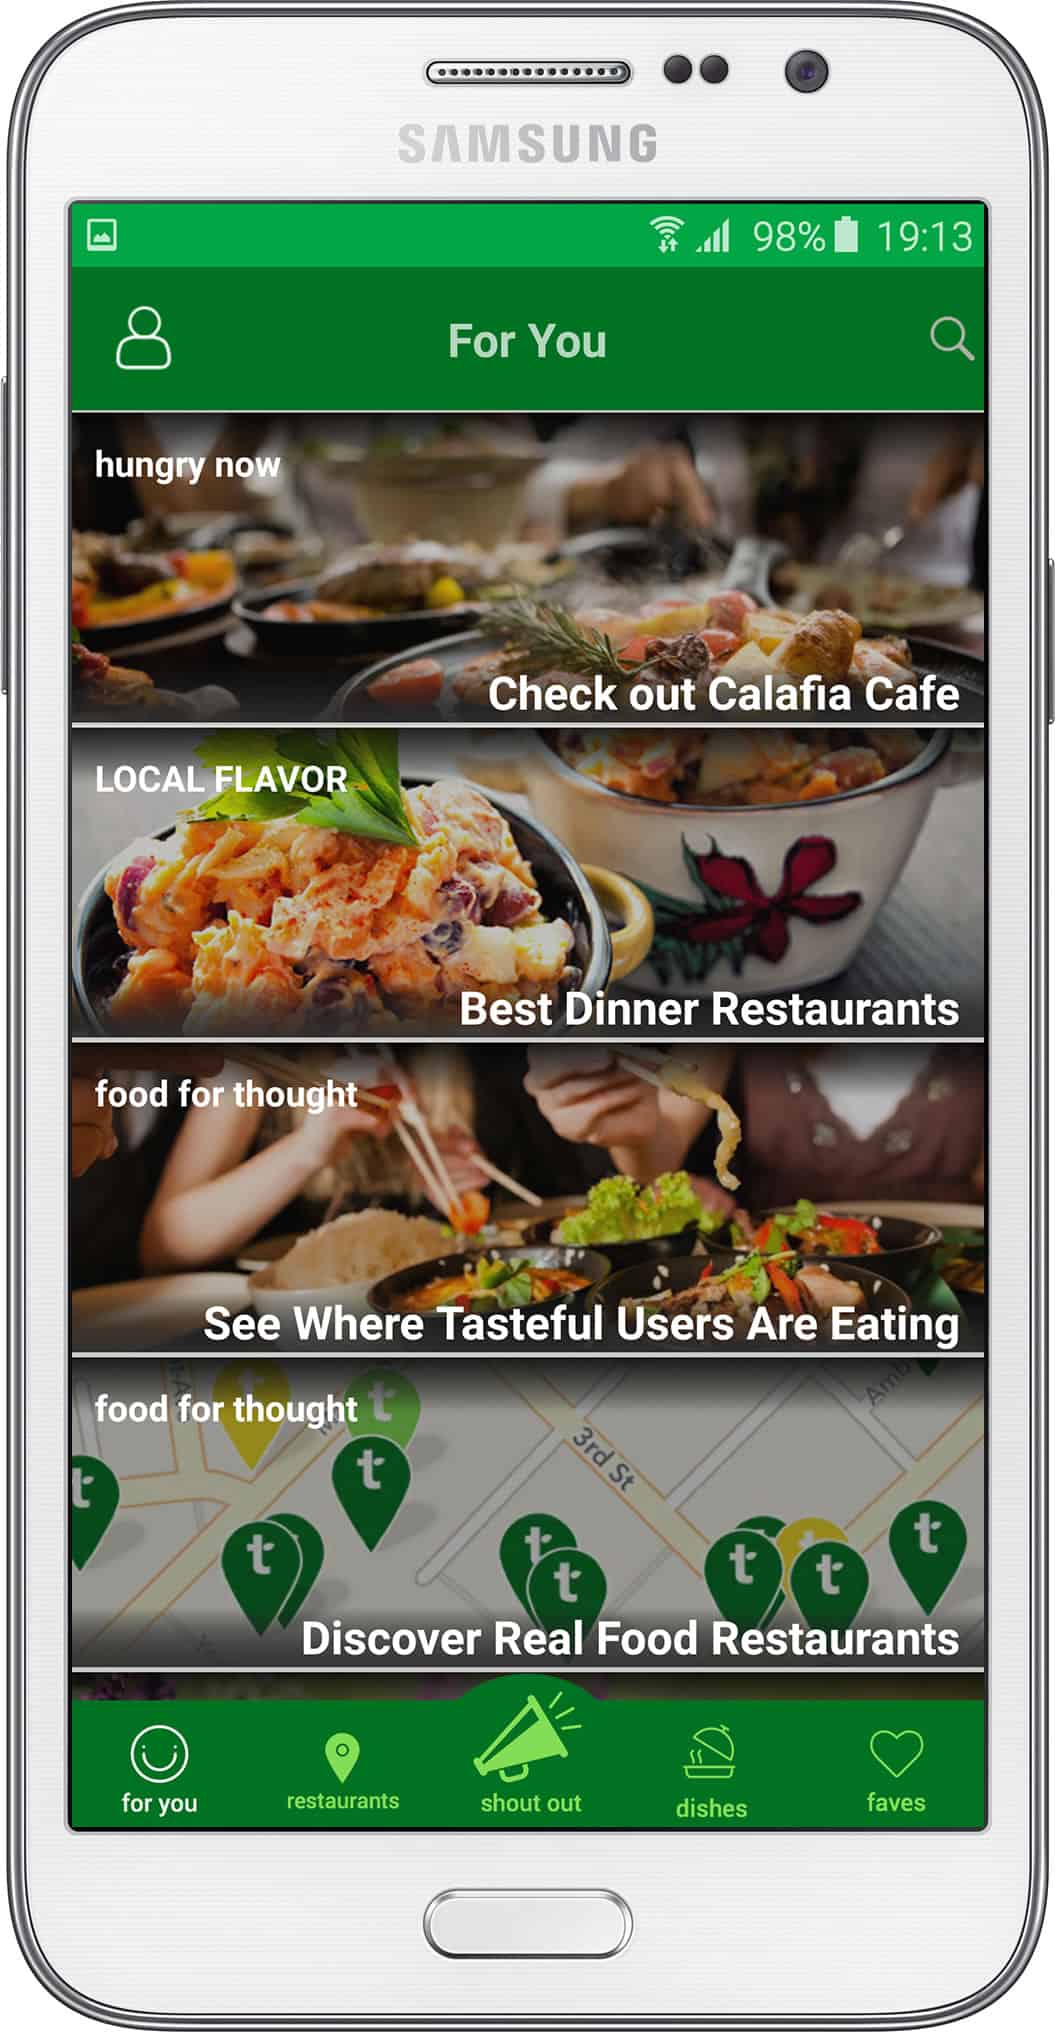 A screenshot from the Tasteful app displays a number of restaurant options, as well as a map of where local restaurants can be found.